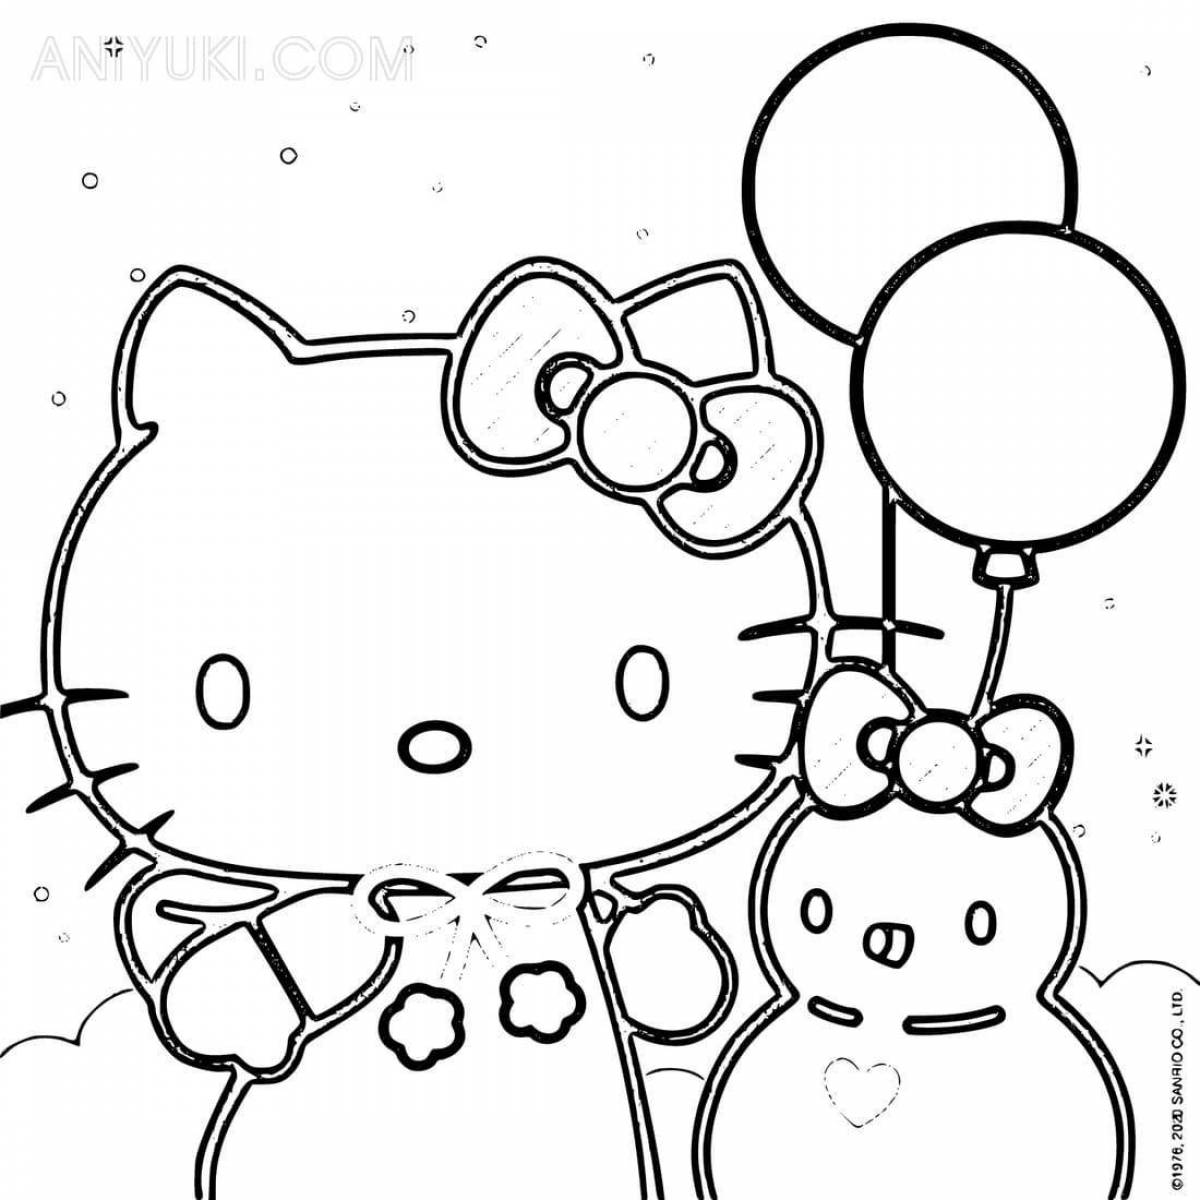 Exquisite hello kitty demon coloring book